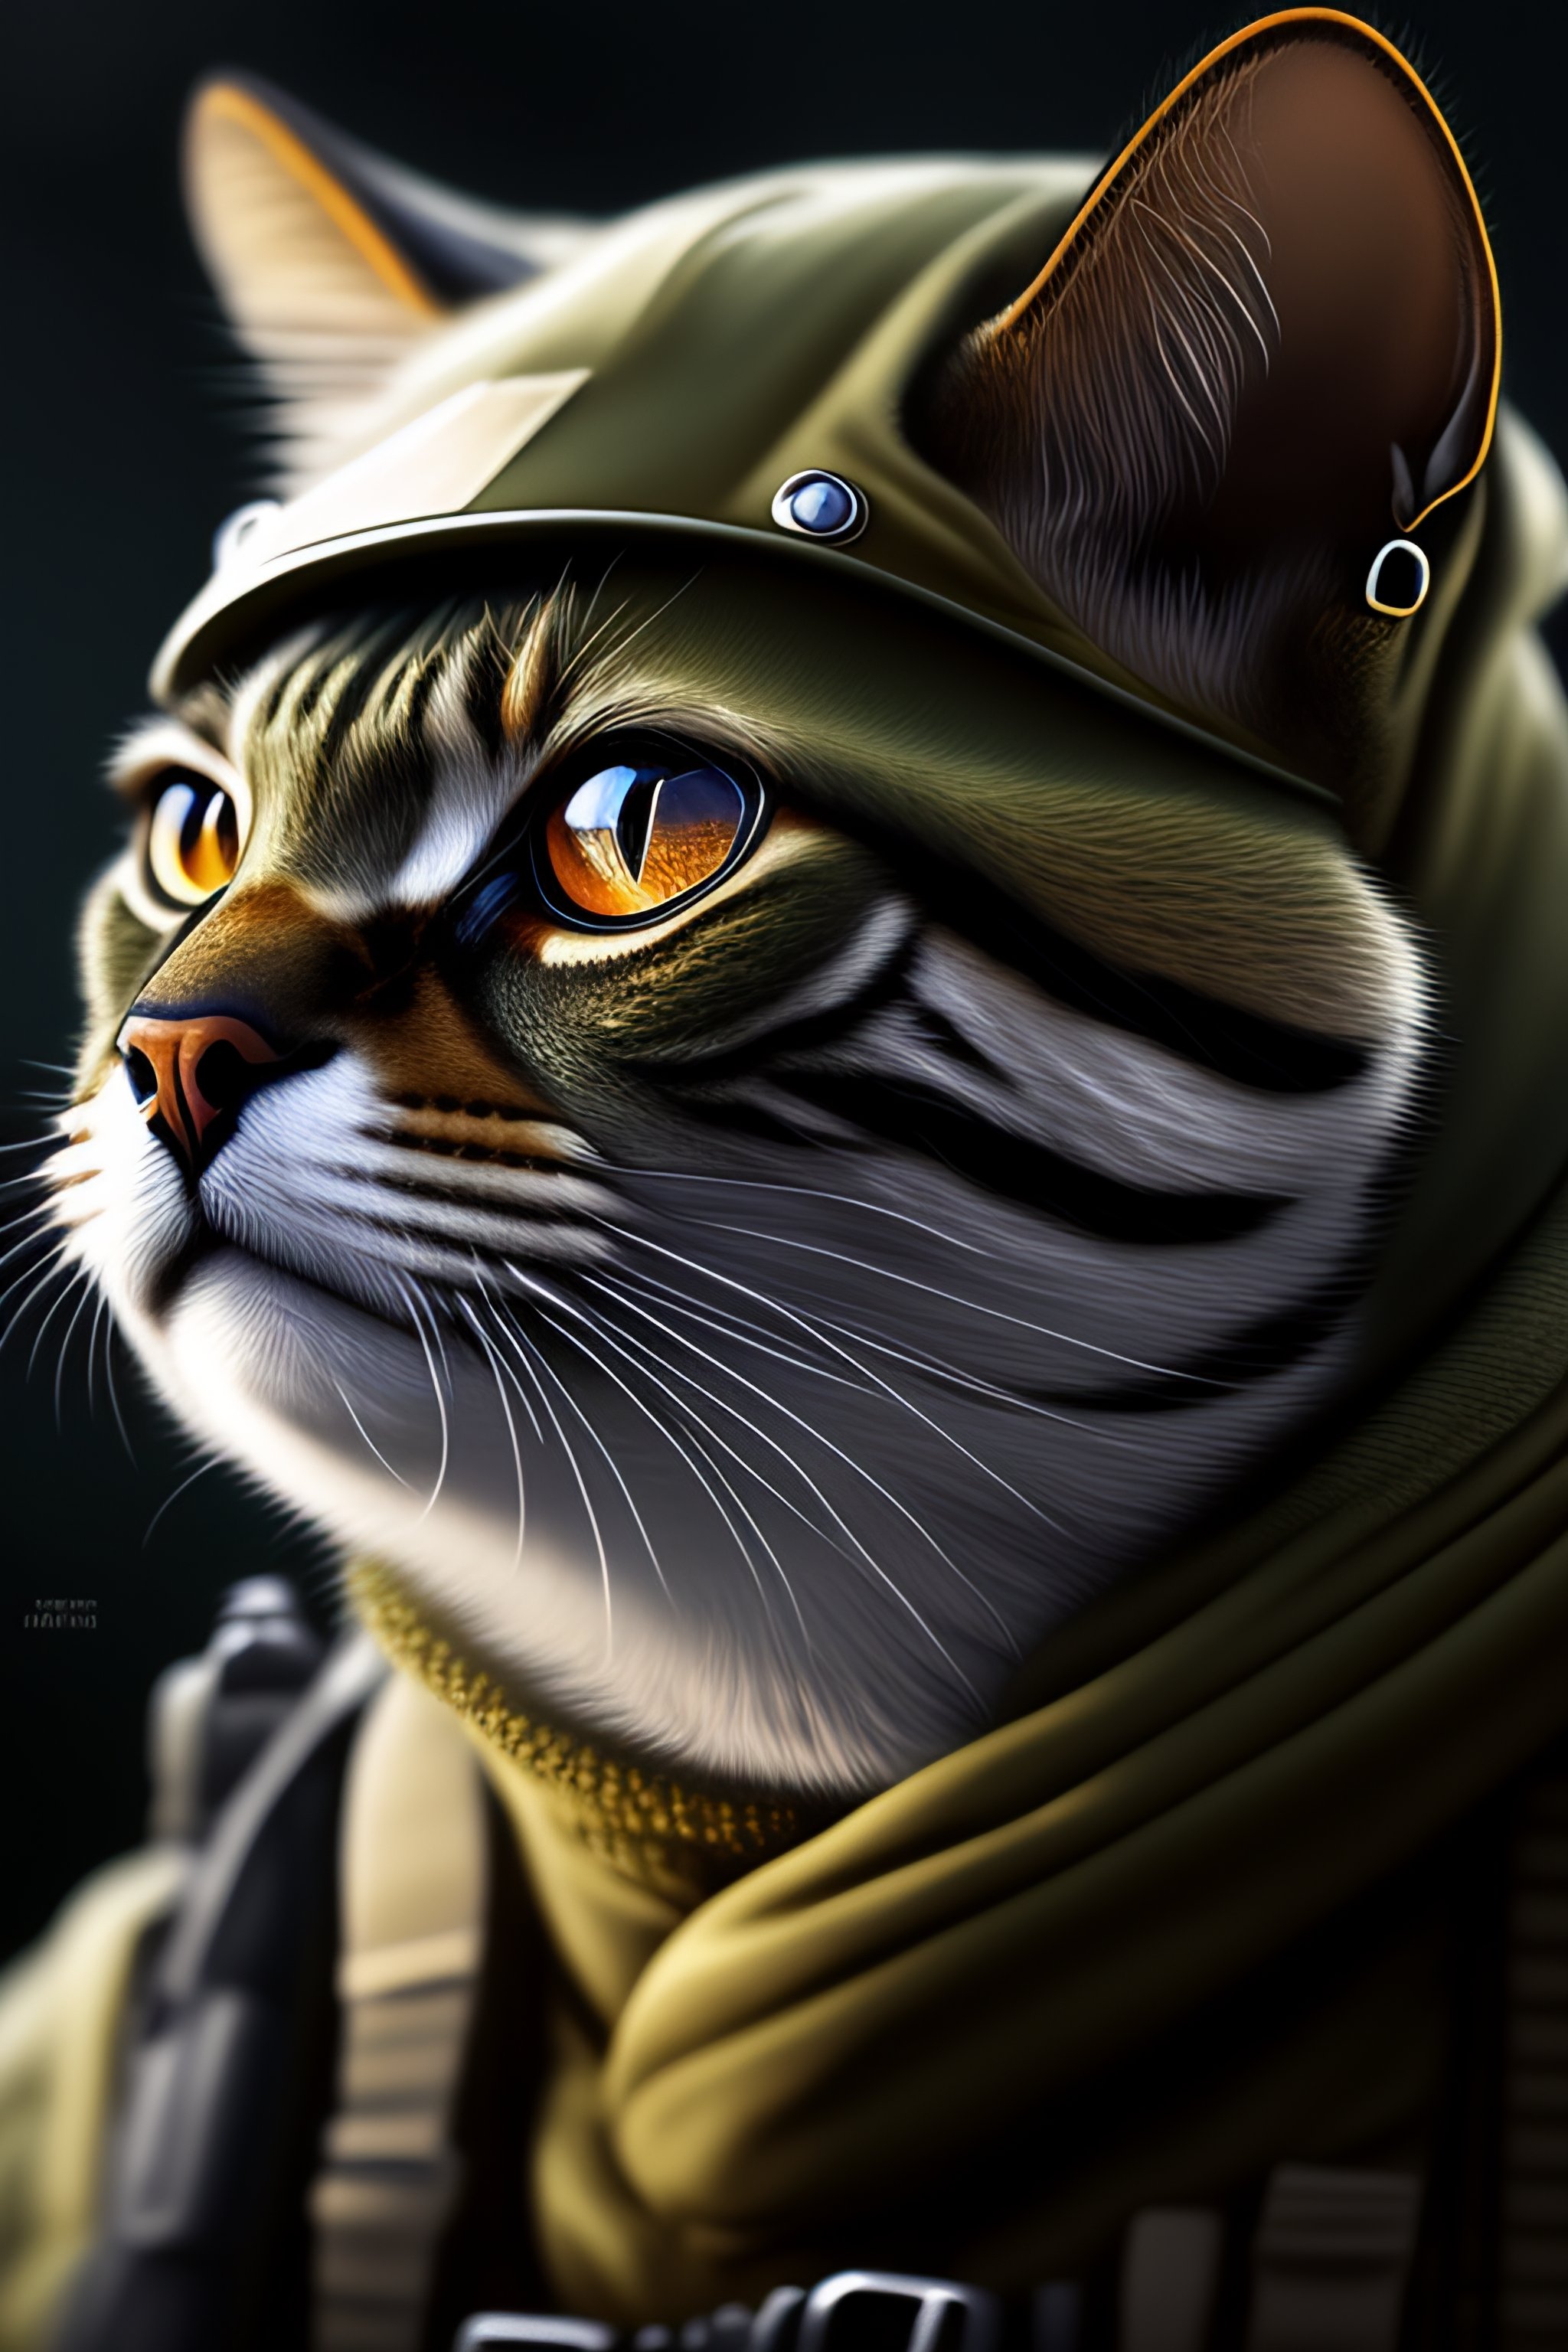 Lexica - Pepe the frog, like a soldier soldier cat warrior in world war ...